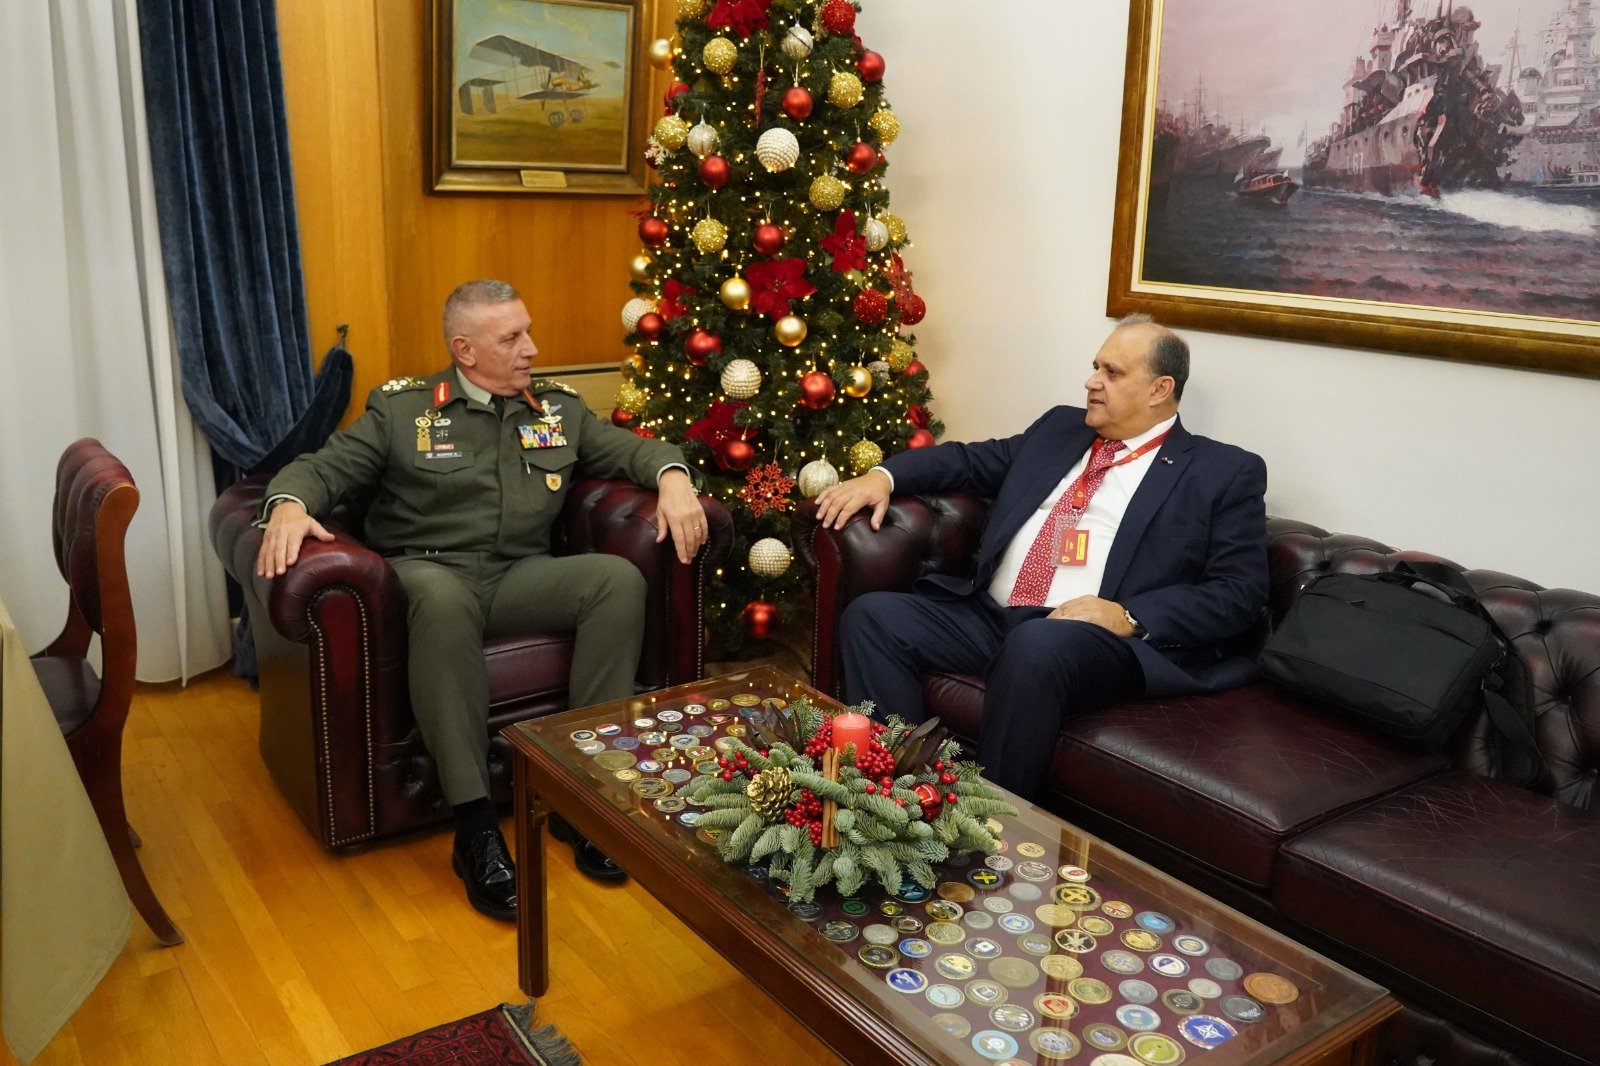  AHI President Larigakis having a discussion with General Konstantinos Floros on developments in Eastern Mediterranean &amp; the important role that the Hellenic Armed Forces are playing in providing peace and stability in the region. 